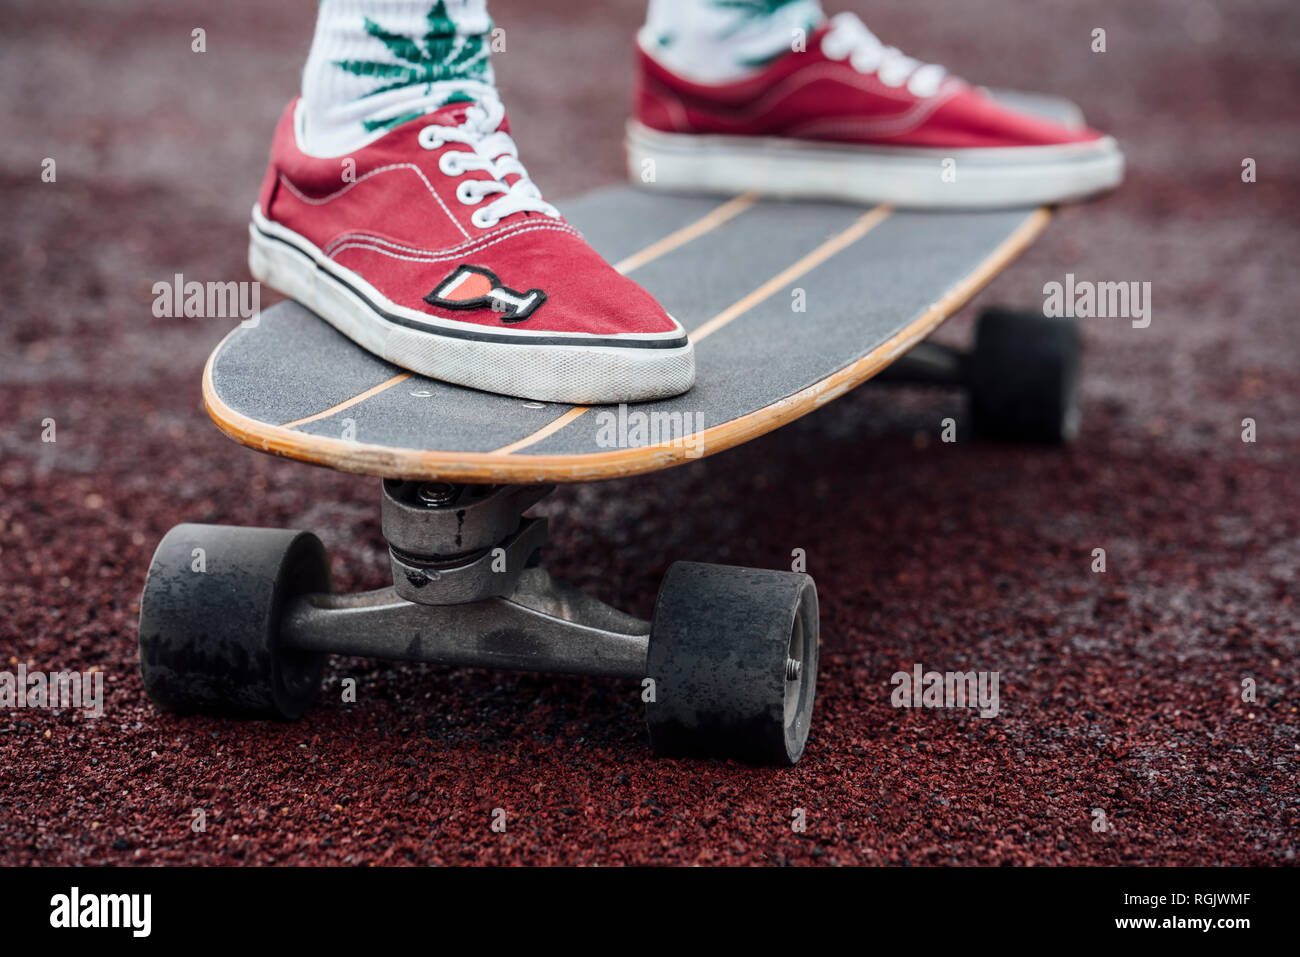 Woman's feet in socks and sneakers on carver skateboard Stock Photo - Alamy